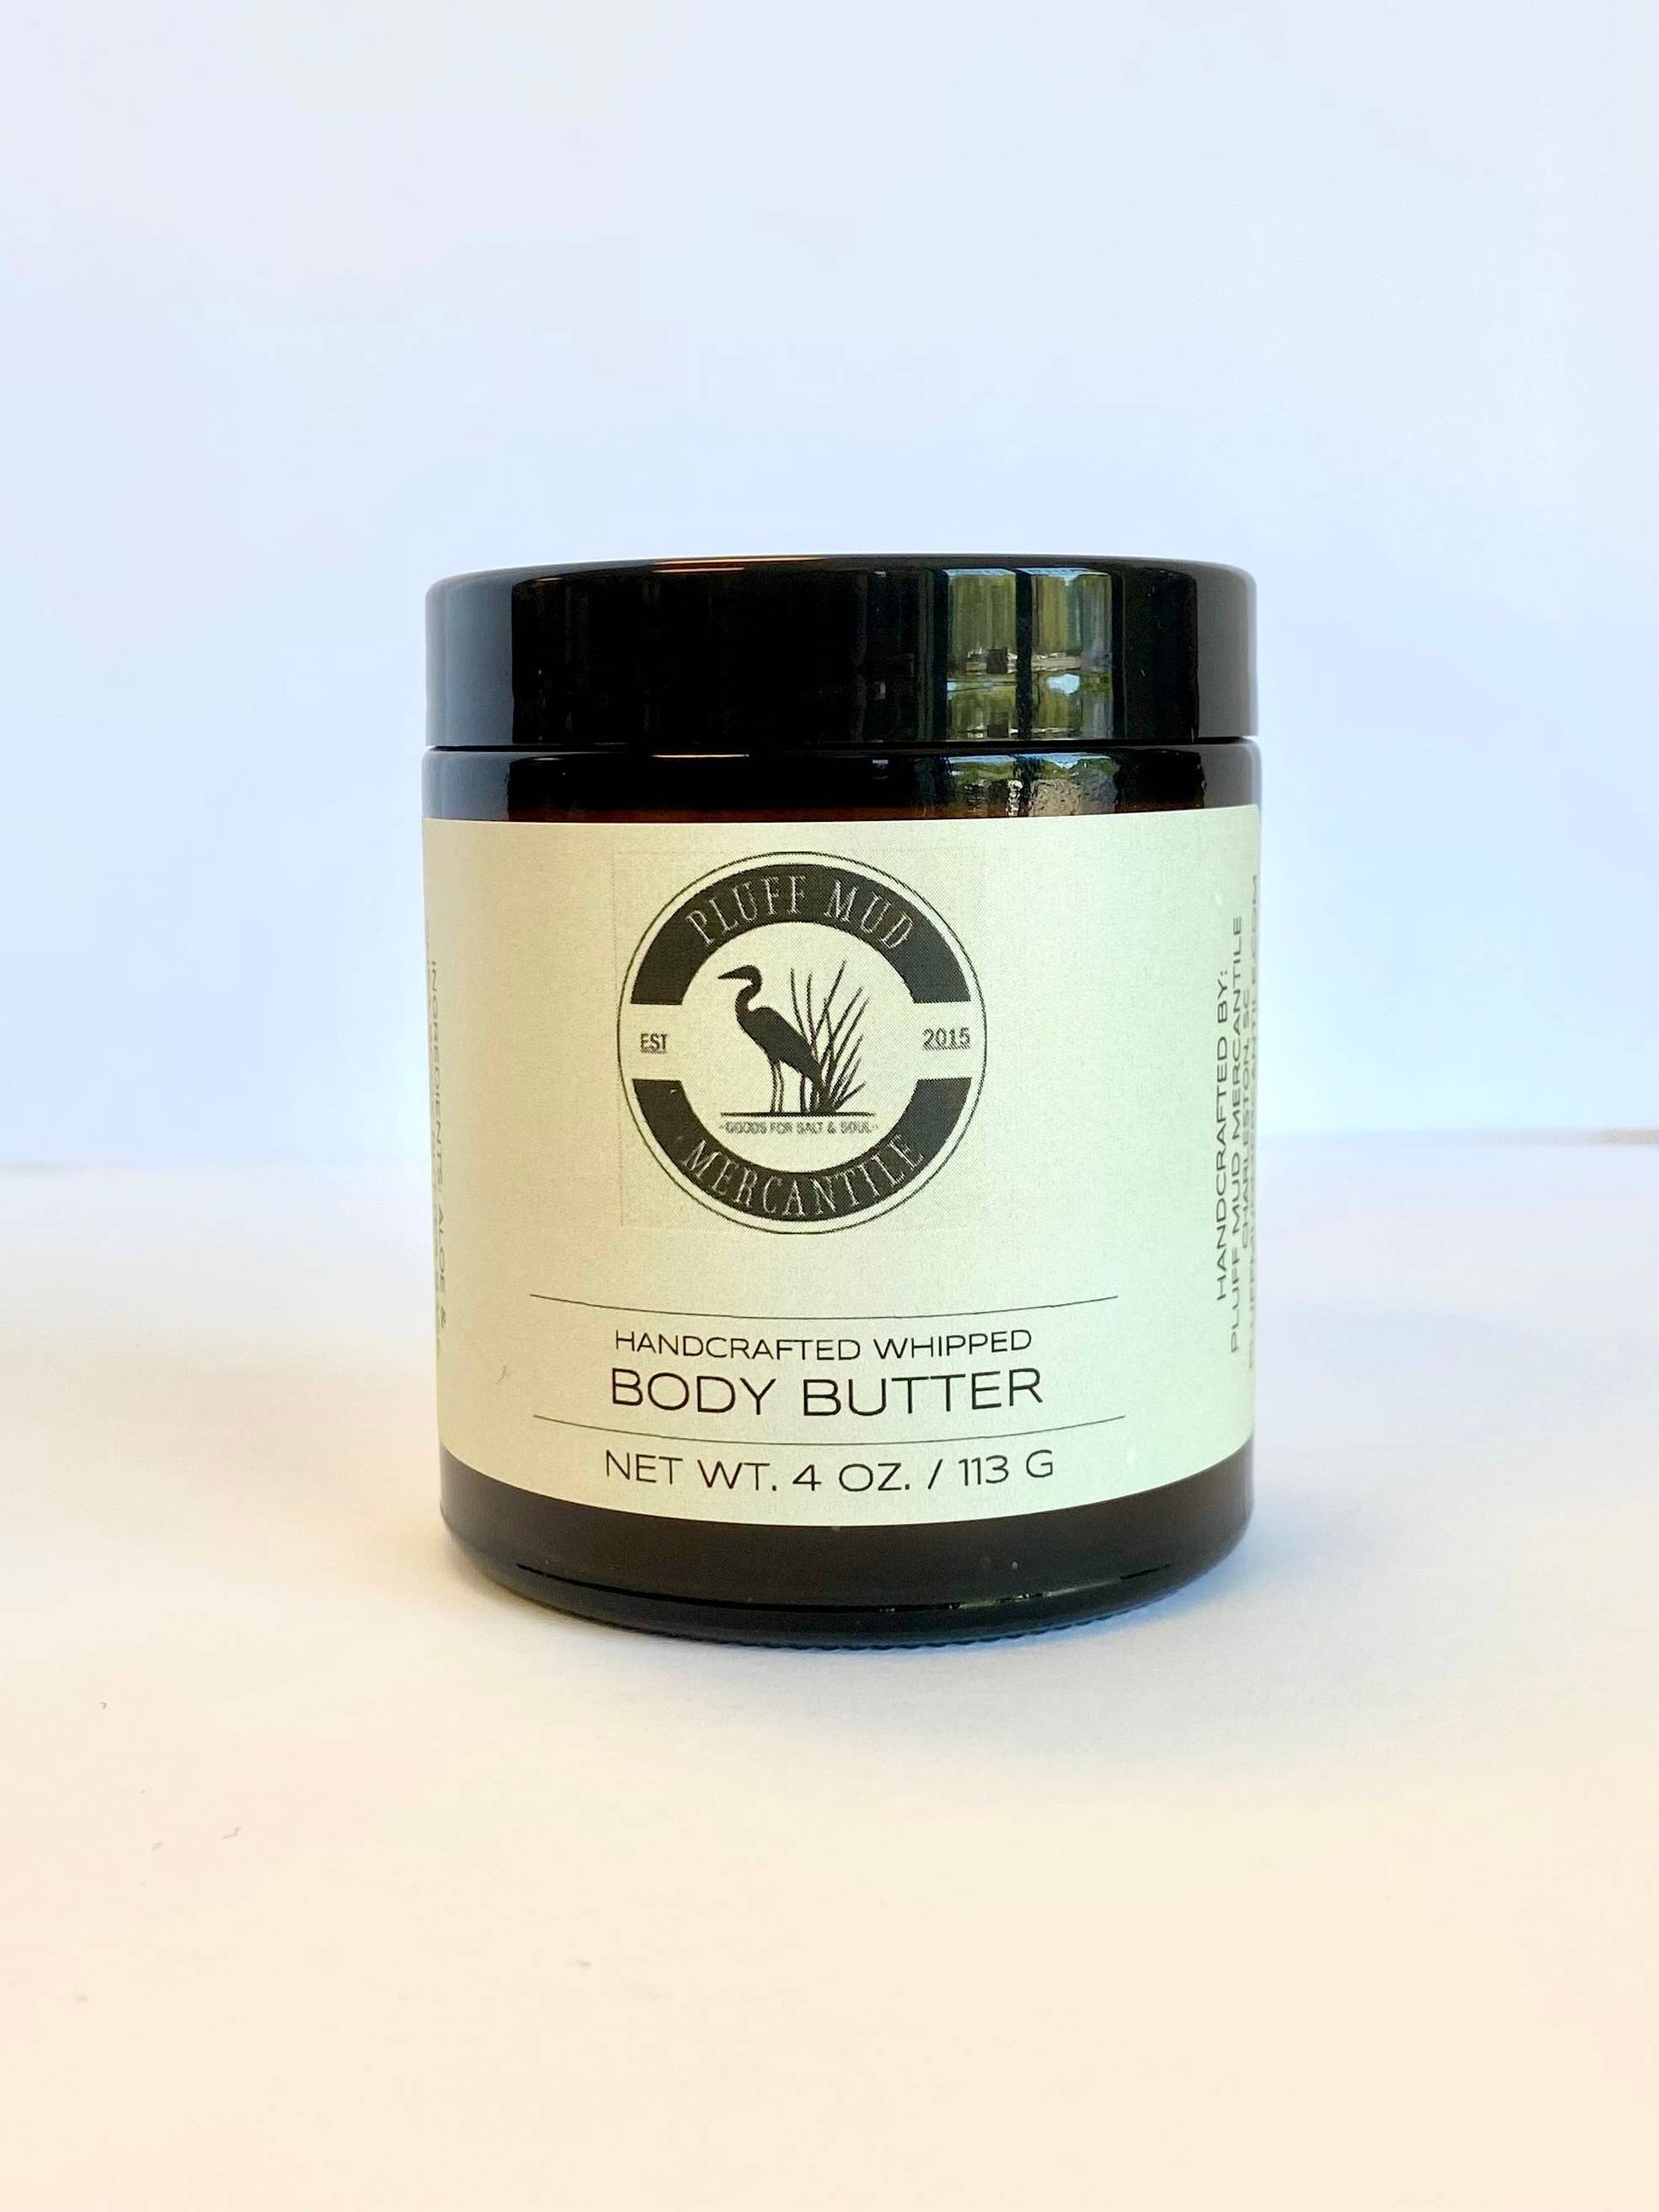 Whipped Body Butter - Peppermint - Pluff Mud Mercantile